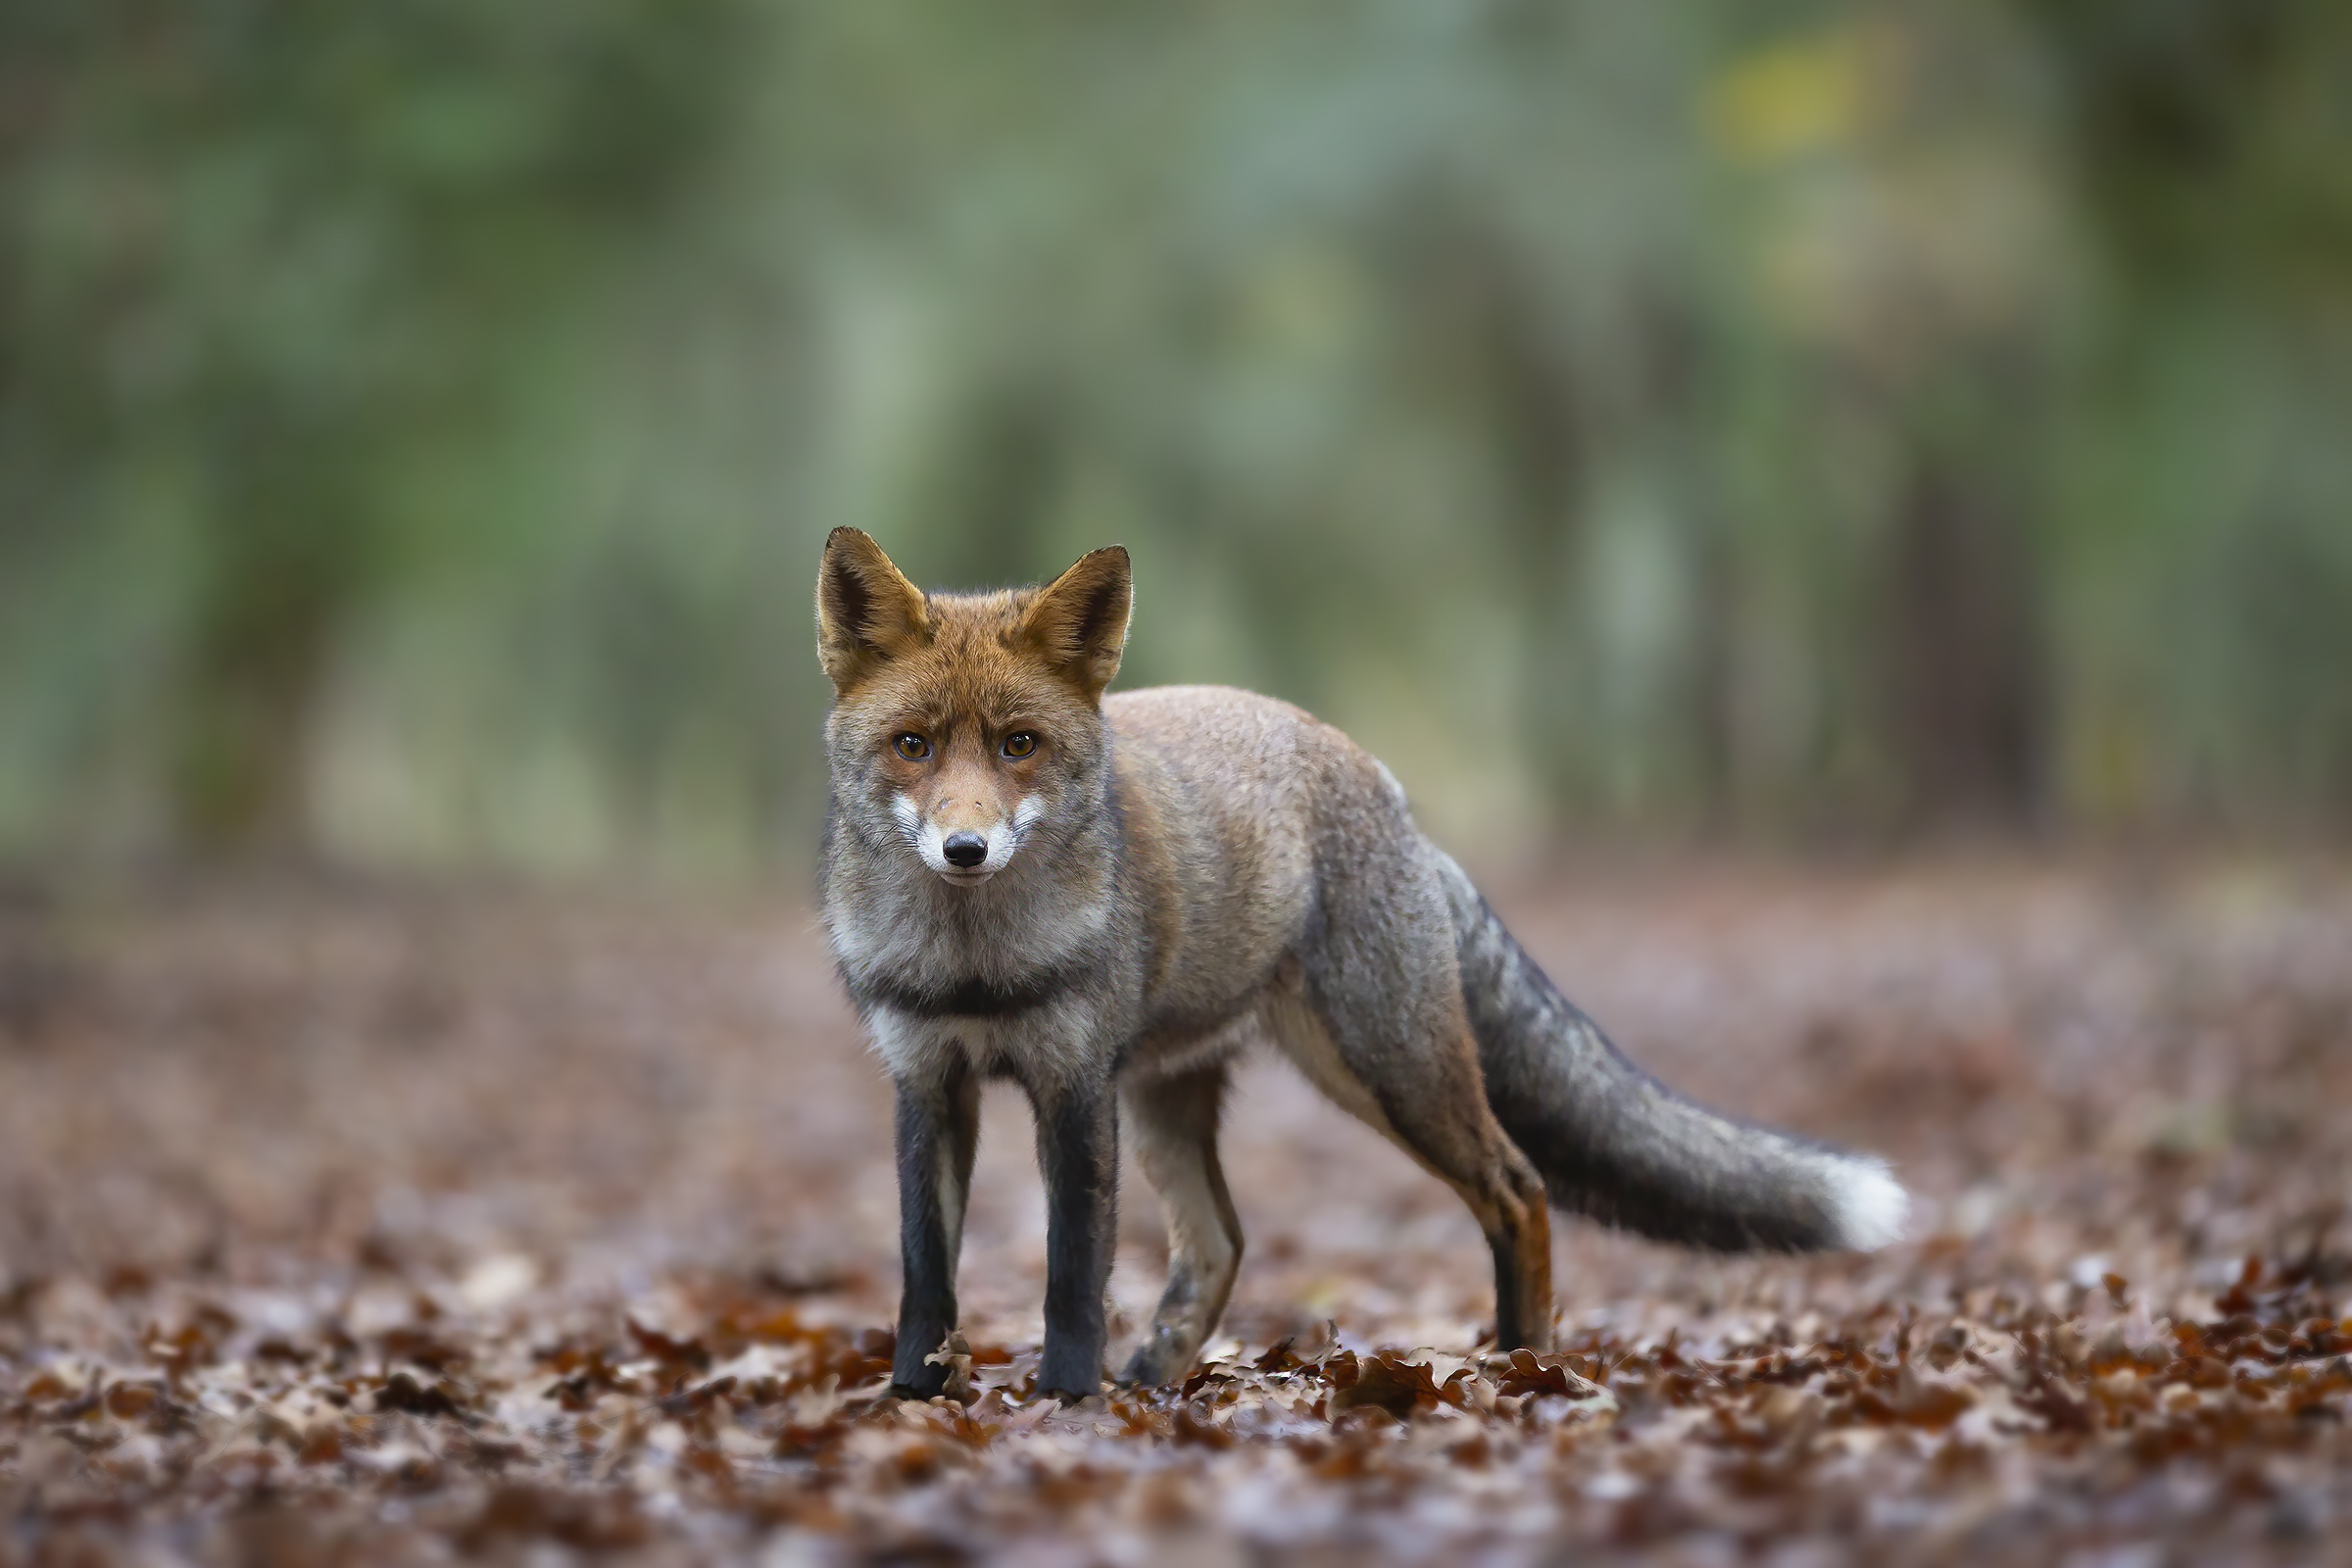 A Fox in the woods...